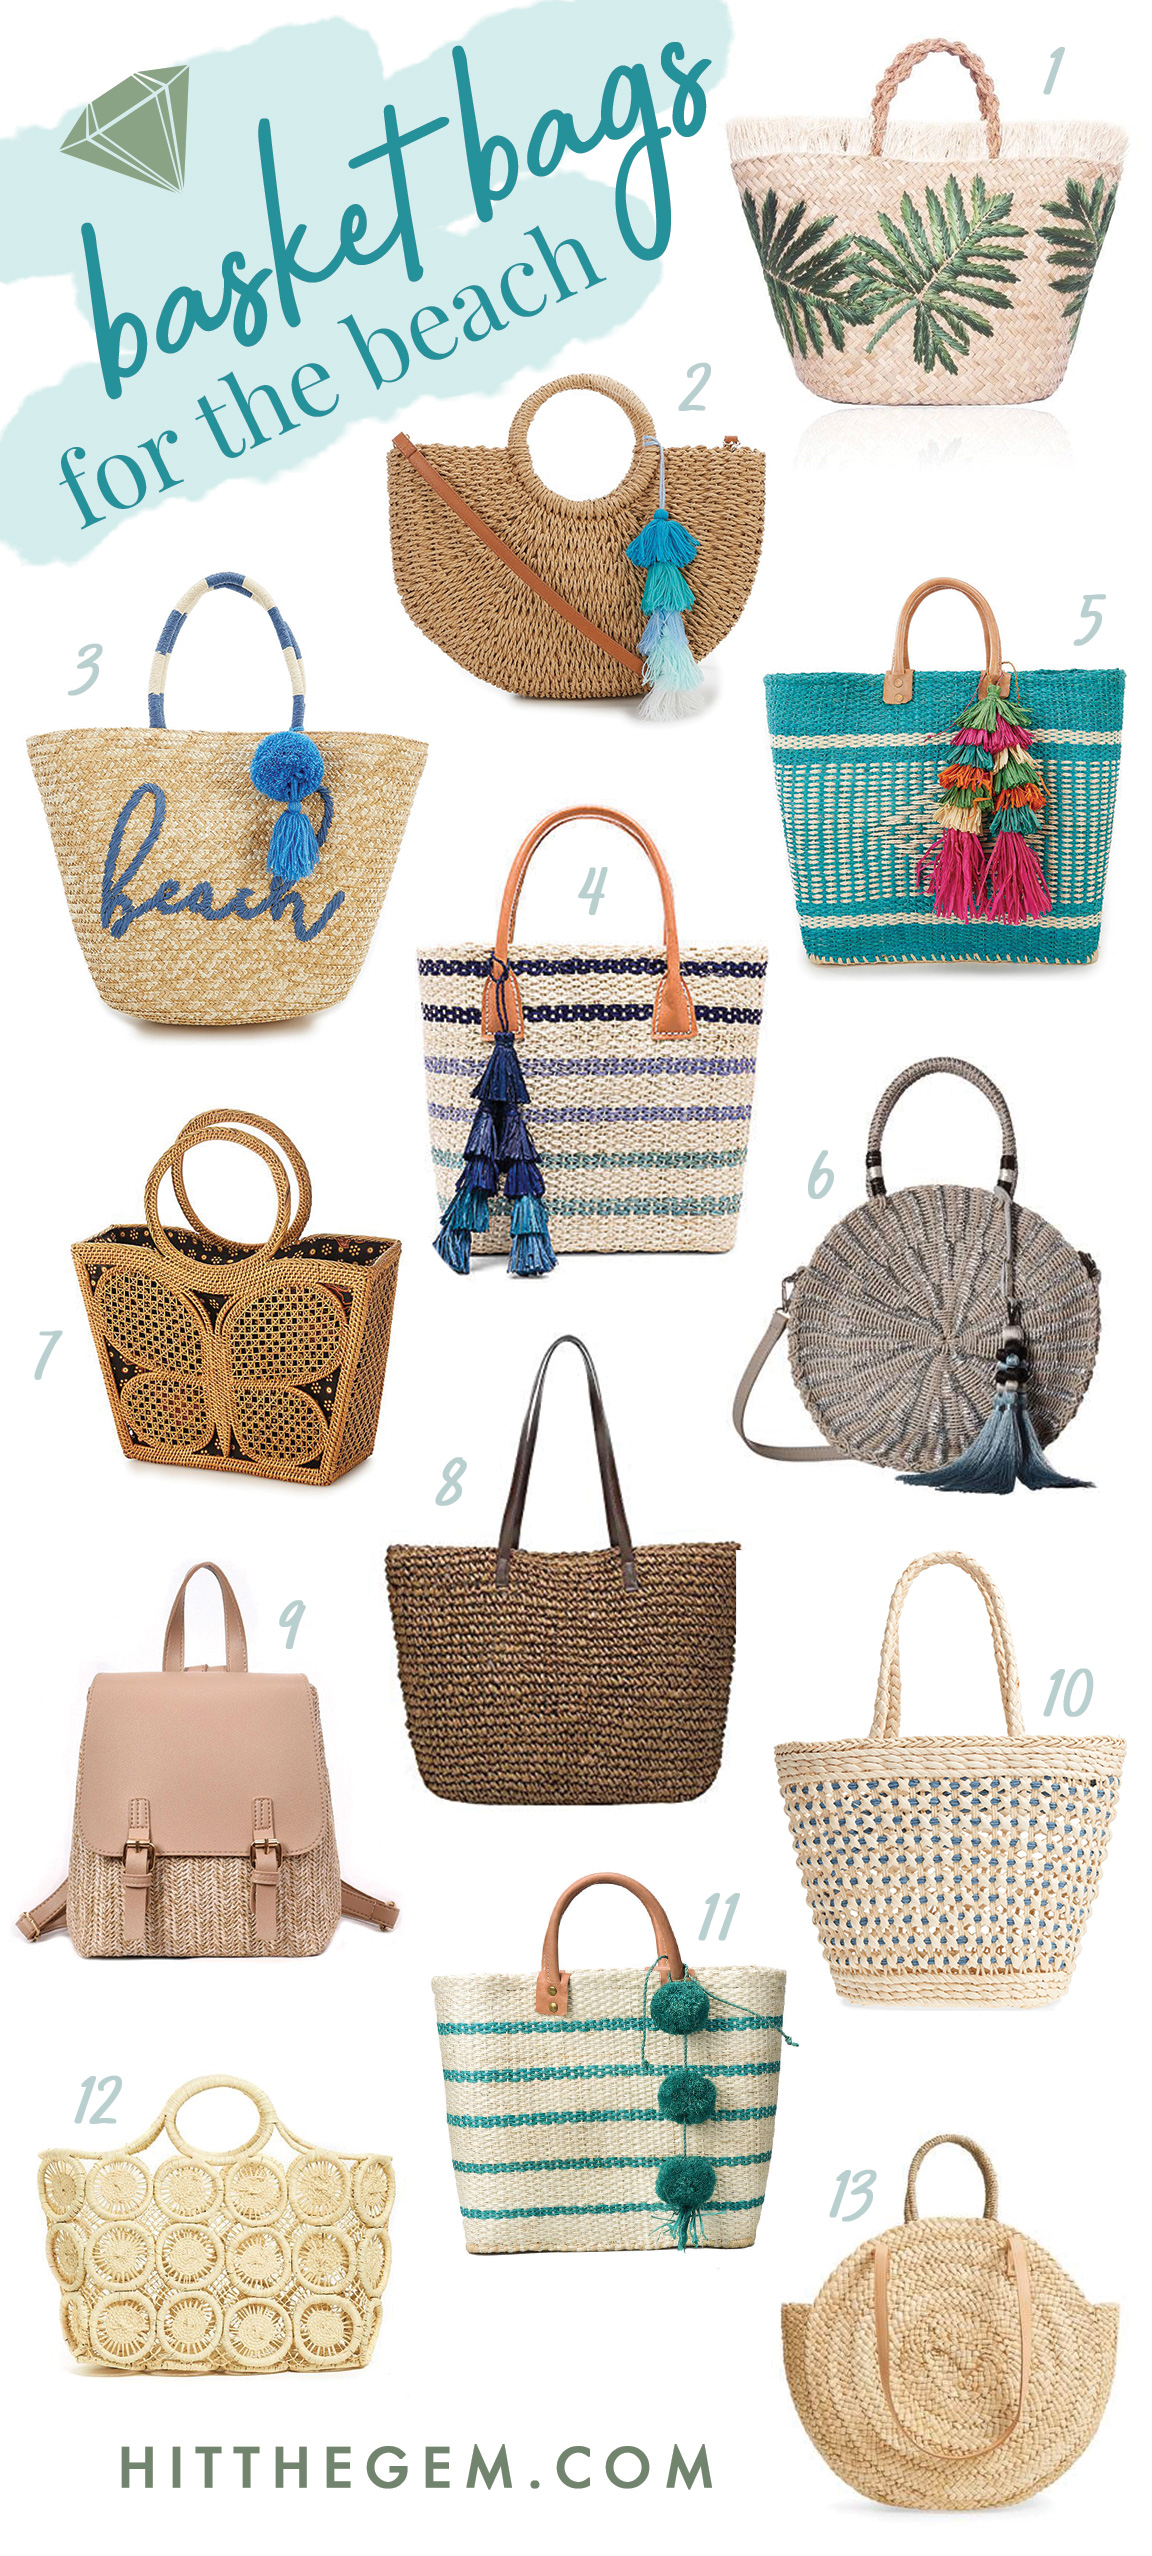 Woven, wicker, and straw basket bags have become a staple of summer. From circular shapes to chic backpacks, here's the best bags to sport the trend. By lifestyle blogger Allyn Lewis of The Gem - hitthegem.com